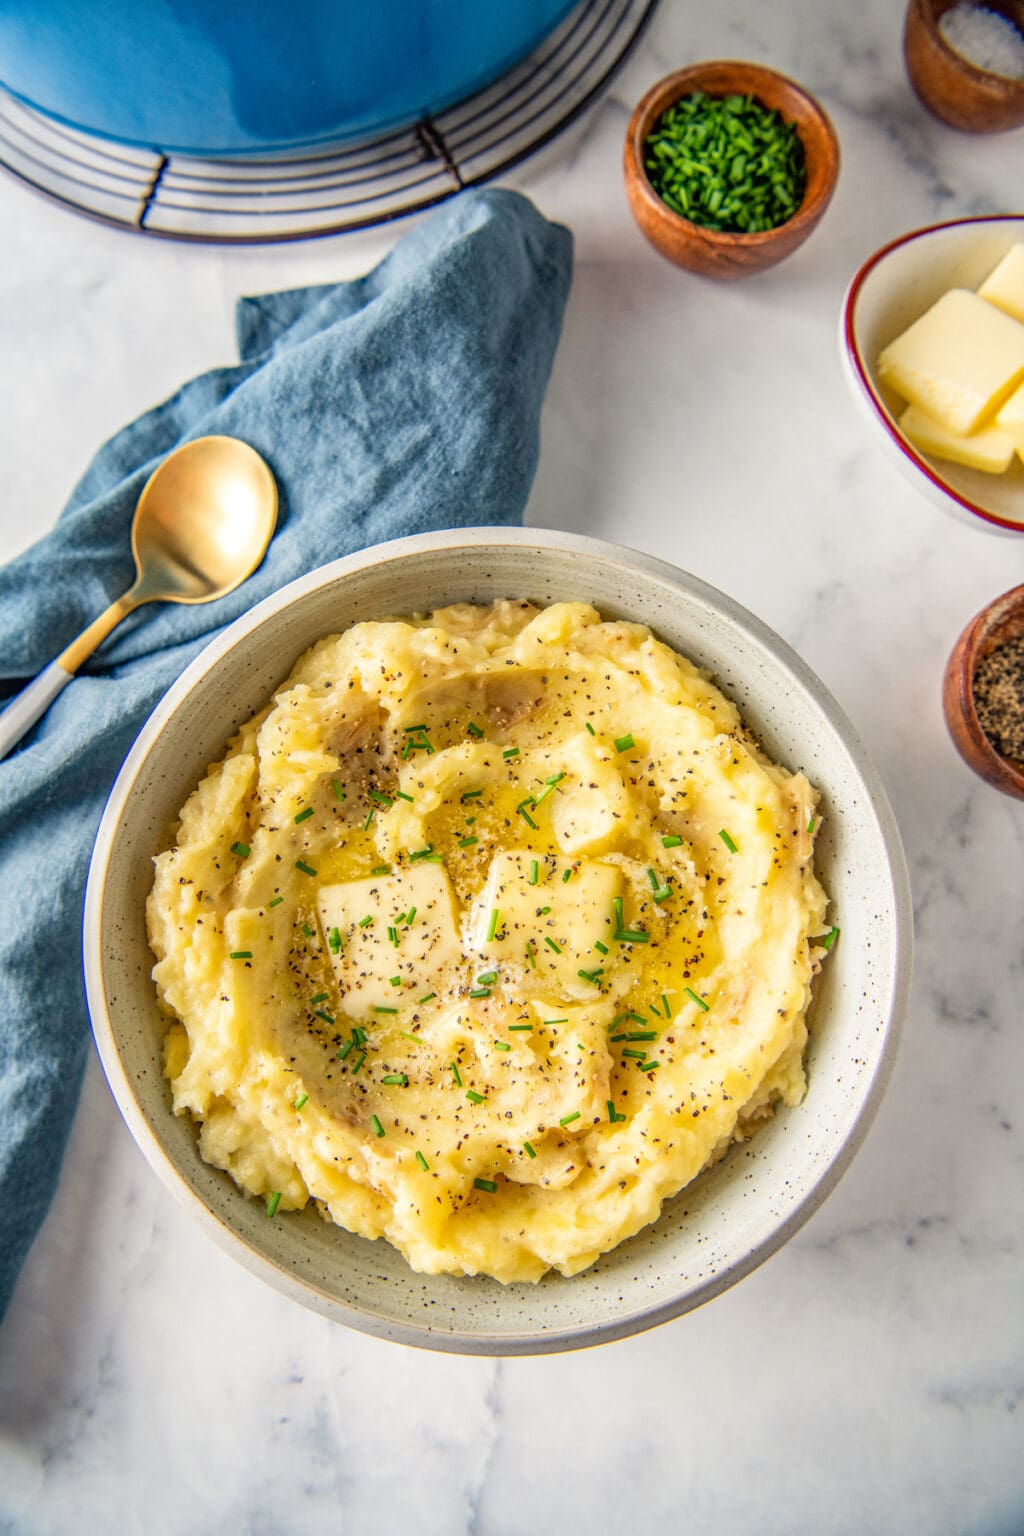 The Best Mashed Potatoes Recipe | Easy Dinner Ideas